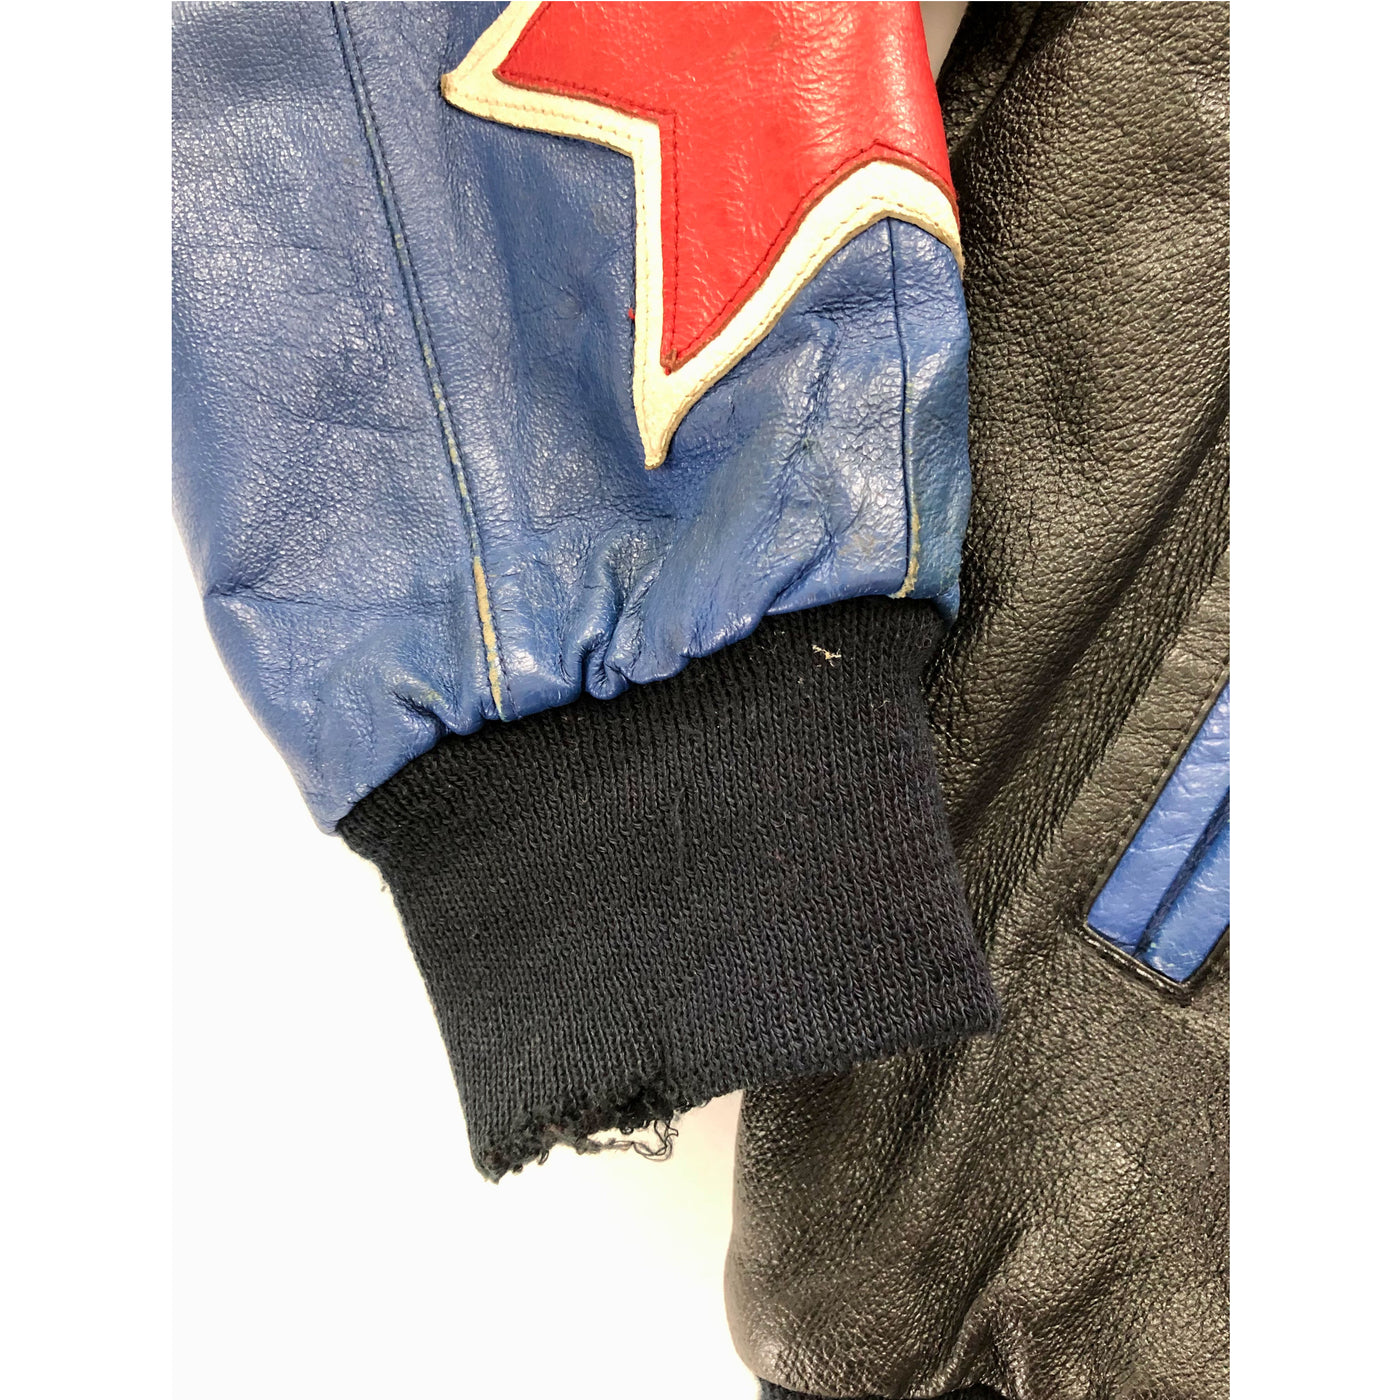 Vintage 90's Disney Mickey and friends leather jacket. Large